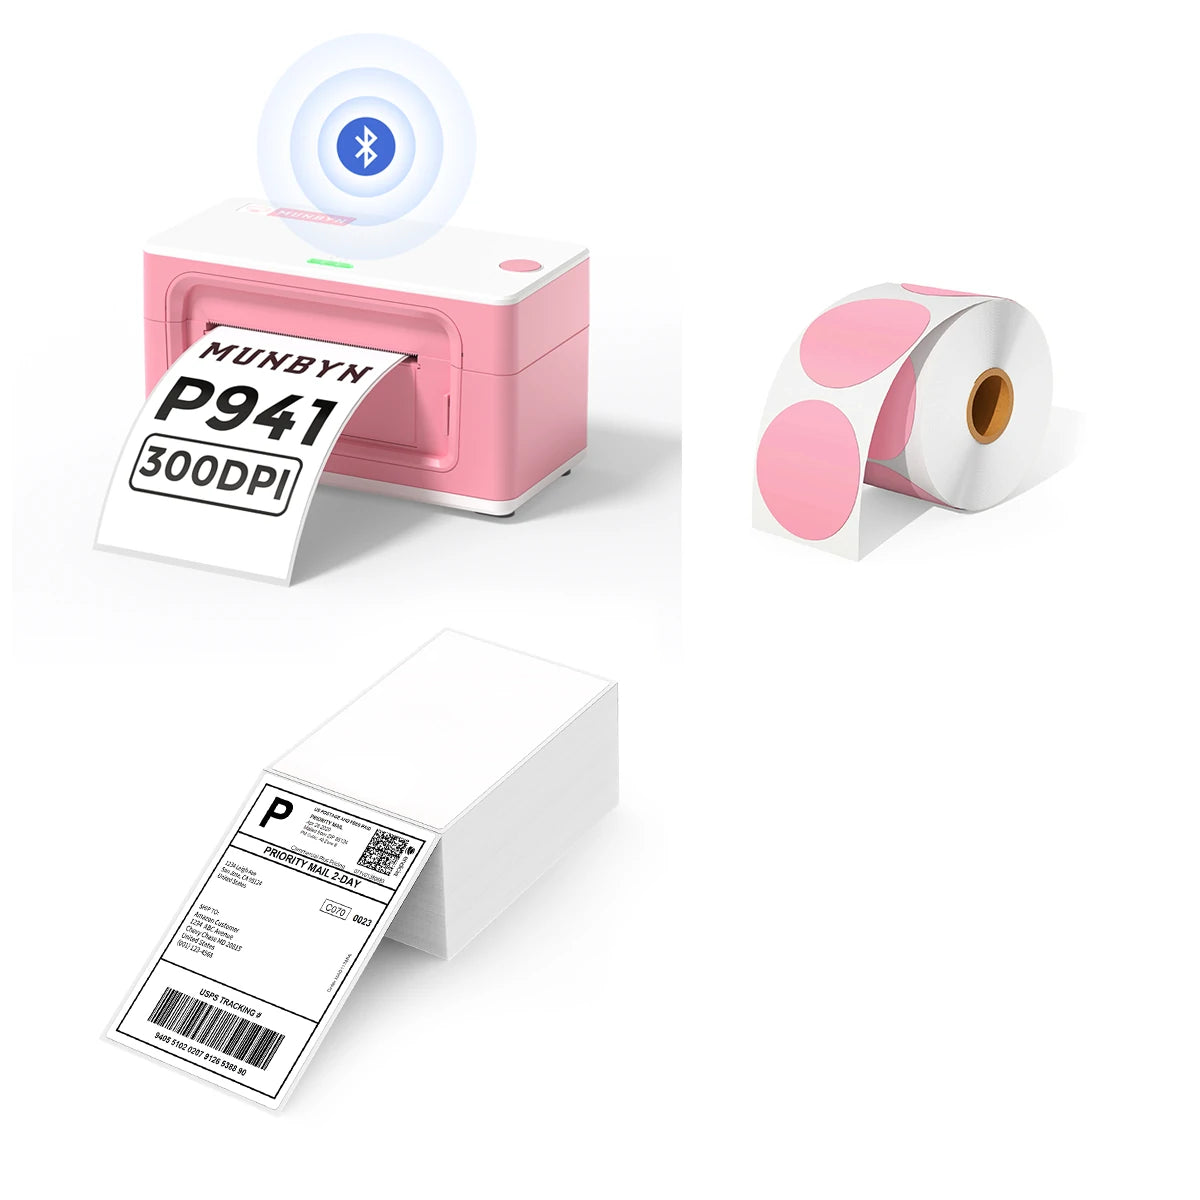 The MUNBYN 941B pink Bluetooth label printer kit includes a printer, a rolls of pink circle labels, and a stack of shipping labels